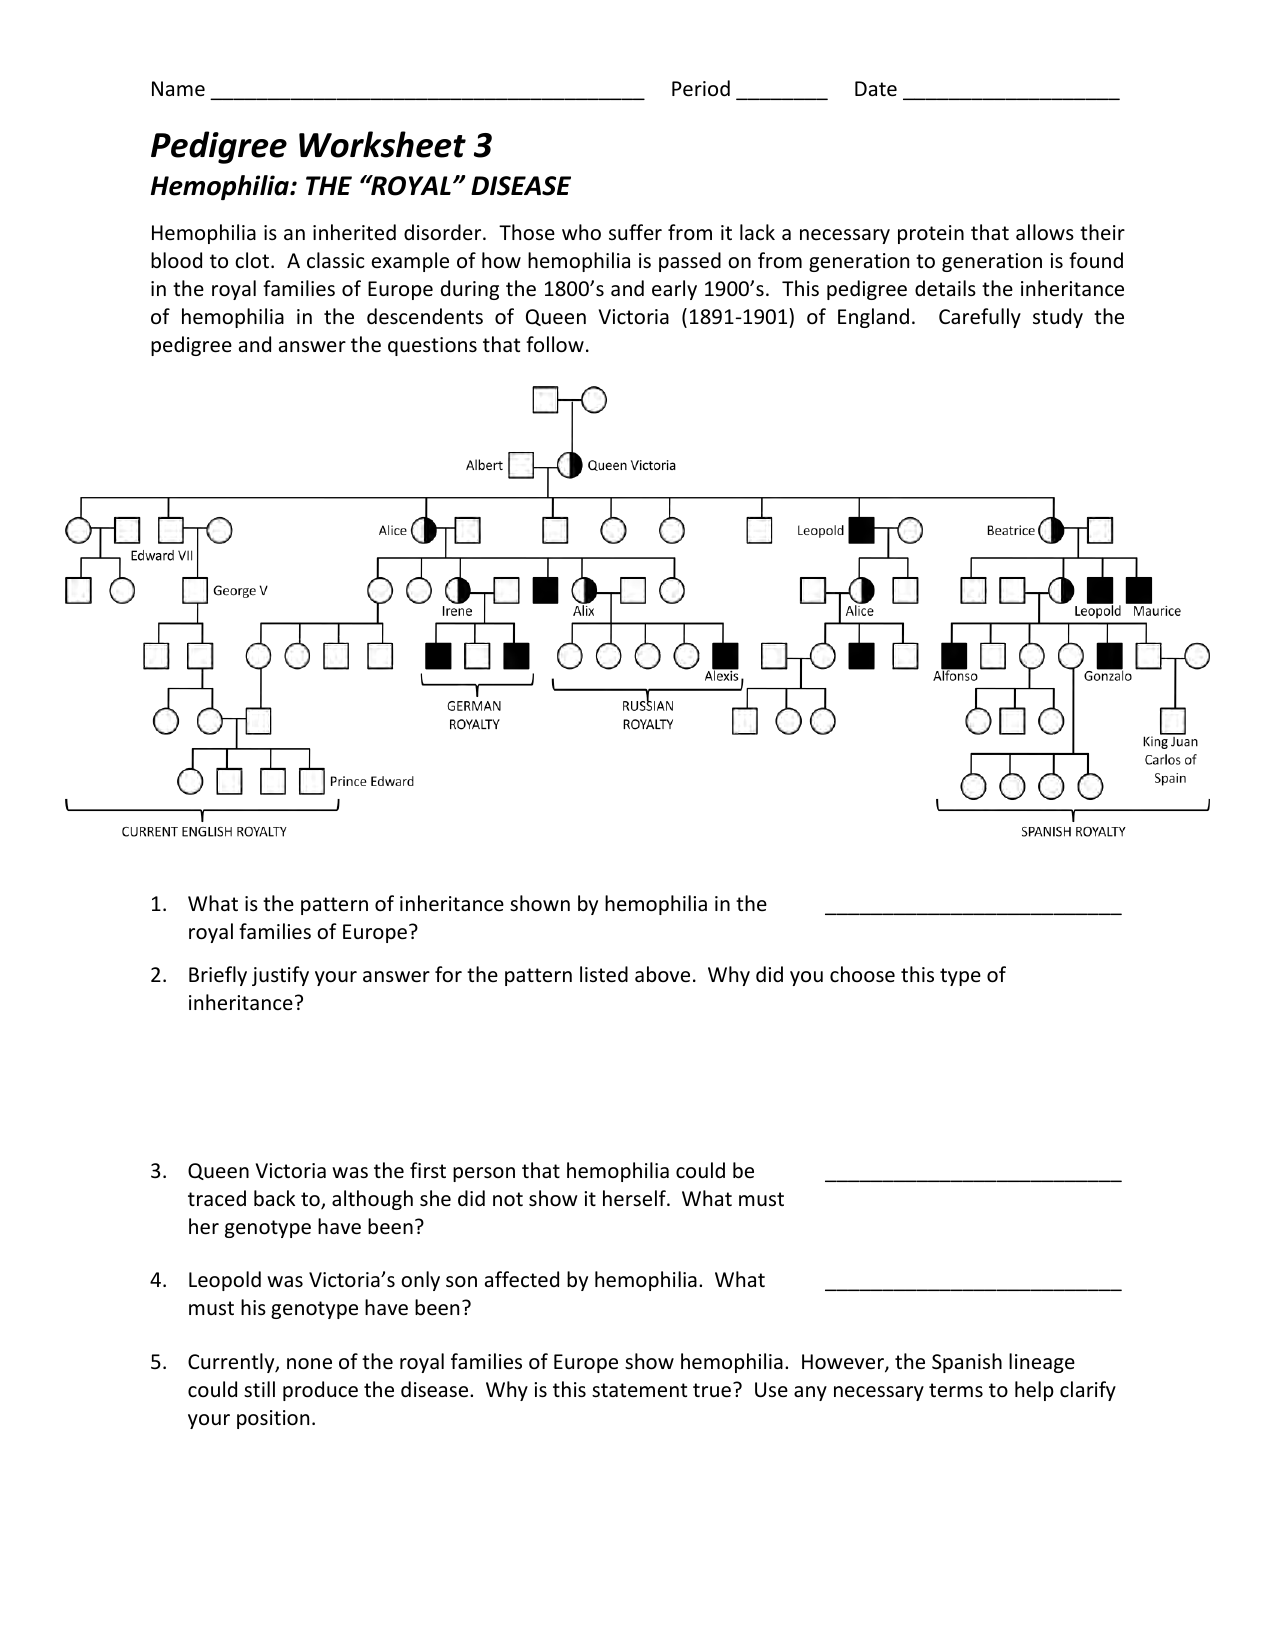 pregnancy-worksheet-3-answers-free-download-goodimg-co